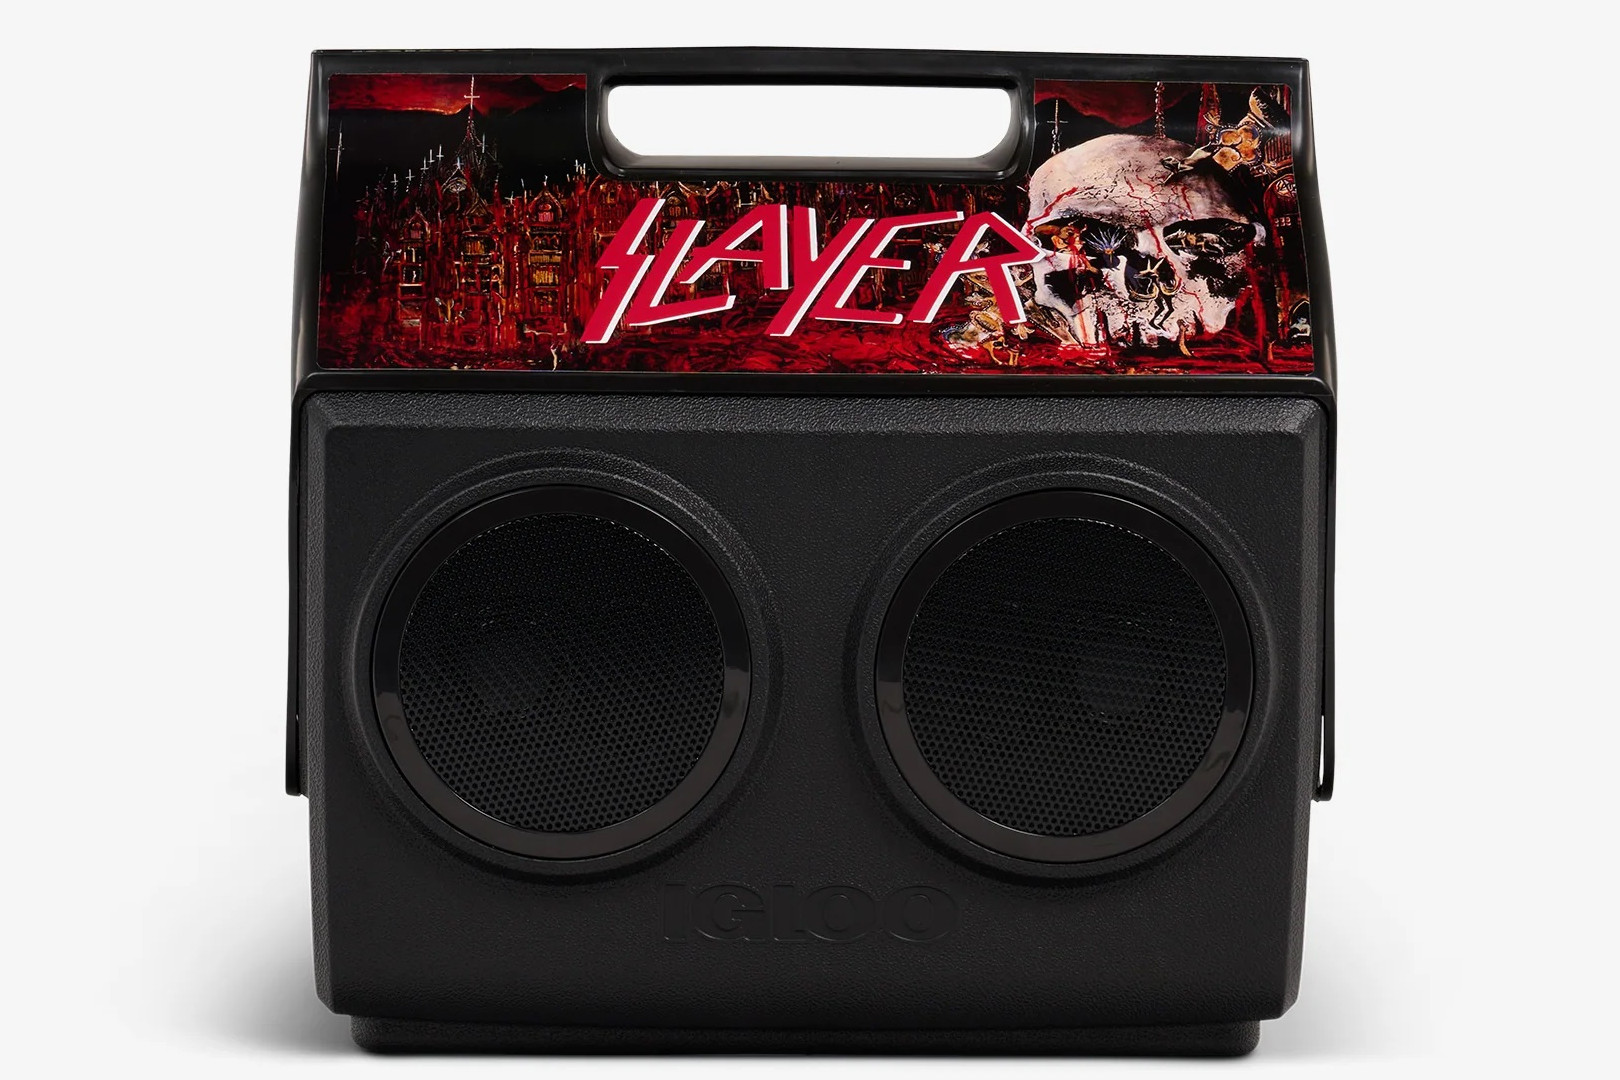 Slayer releases a line of Igloo cooler products